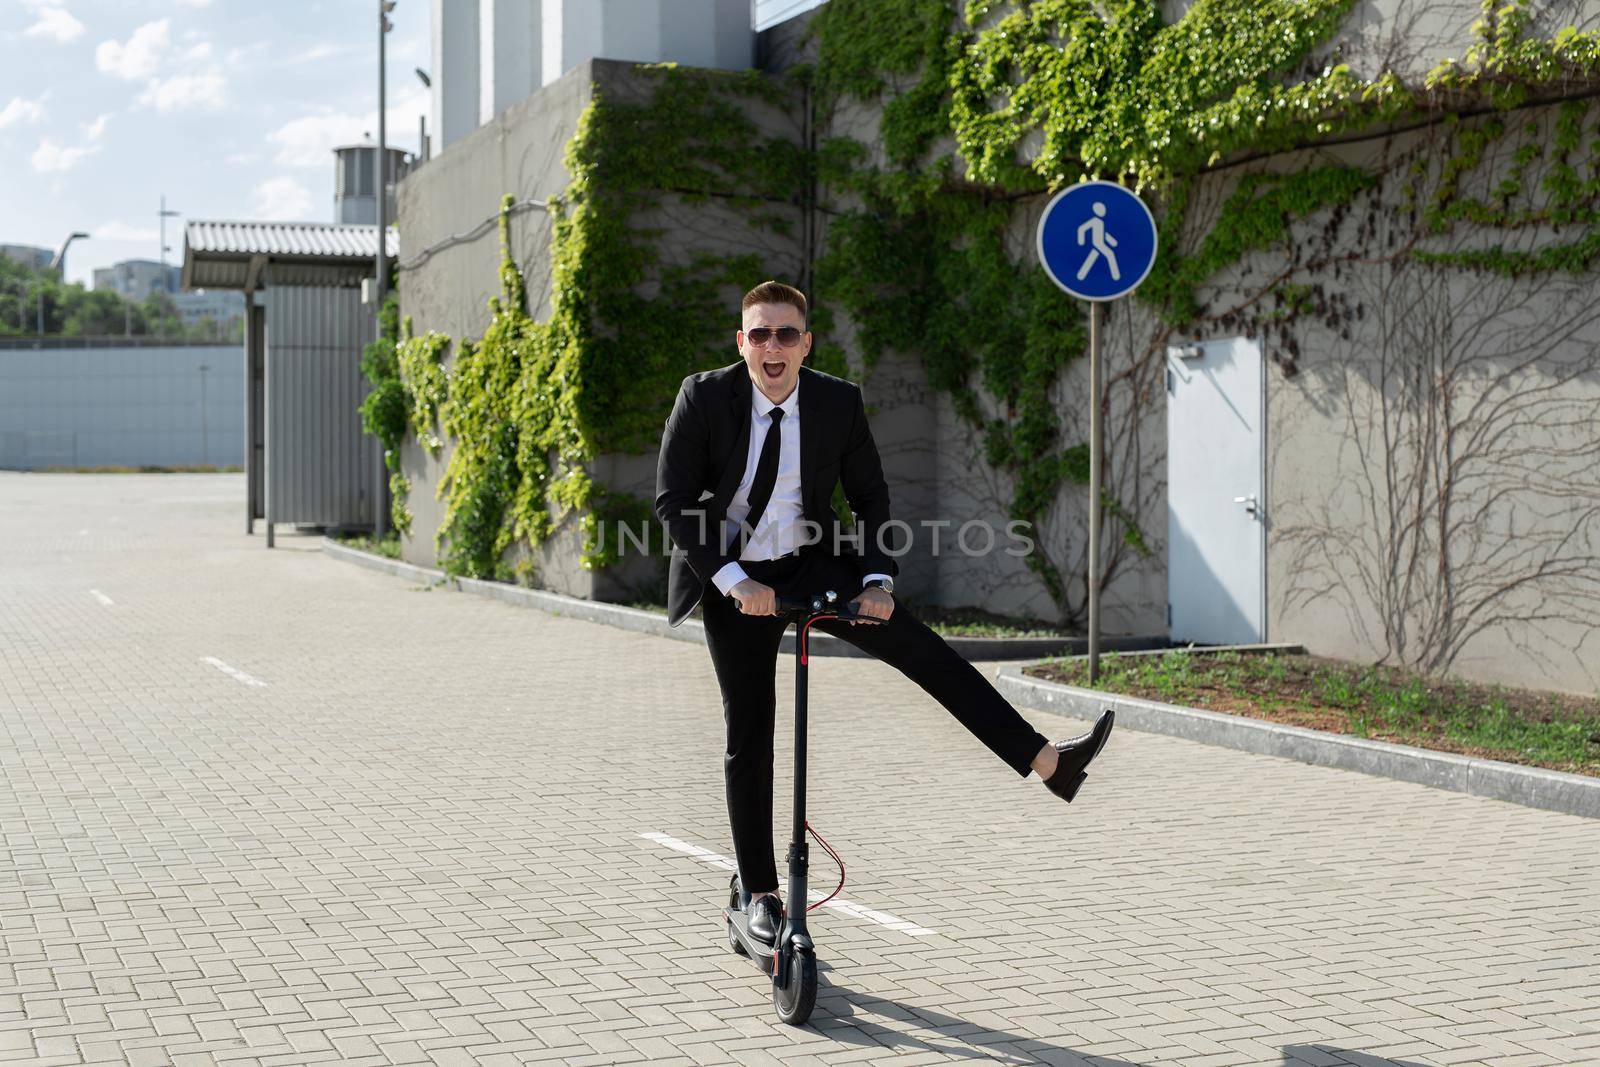 Young handsome businessman in a suit rides an electric scooter around the city and laughs.